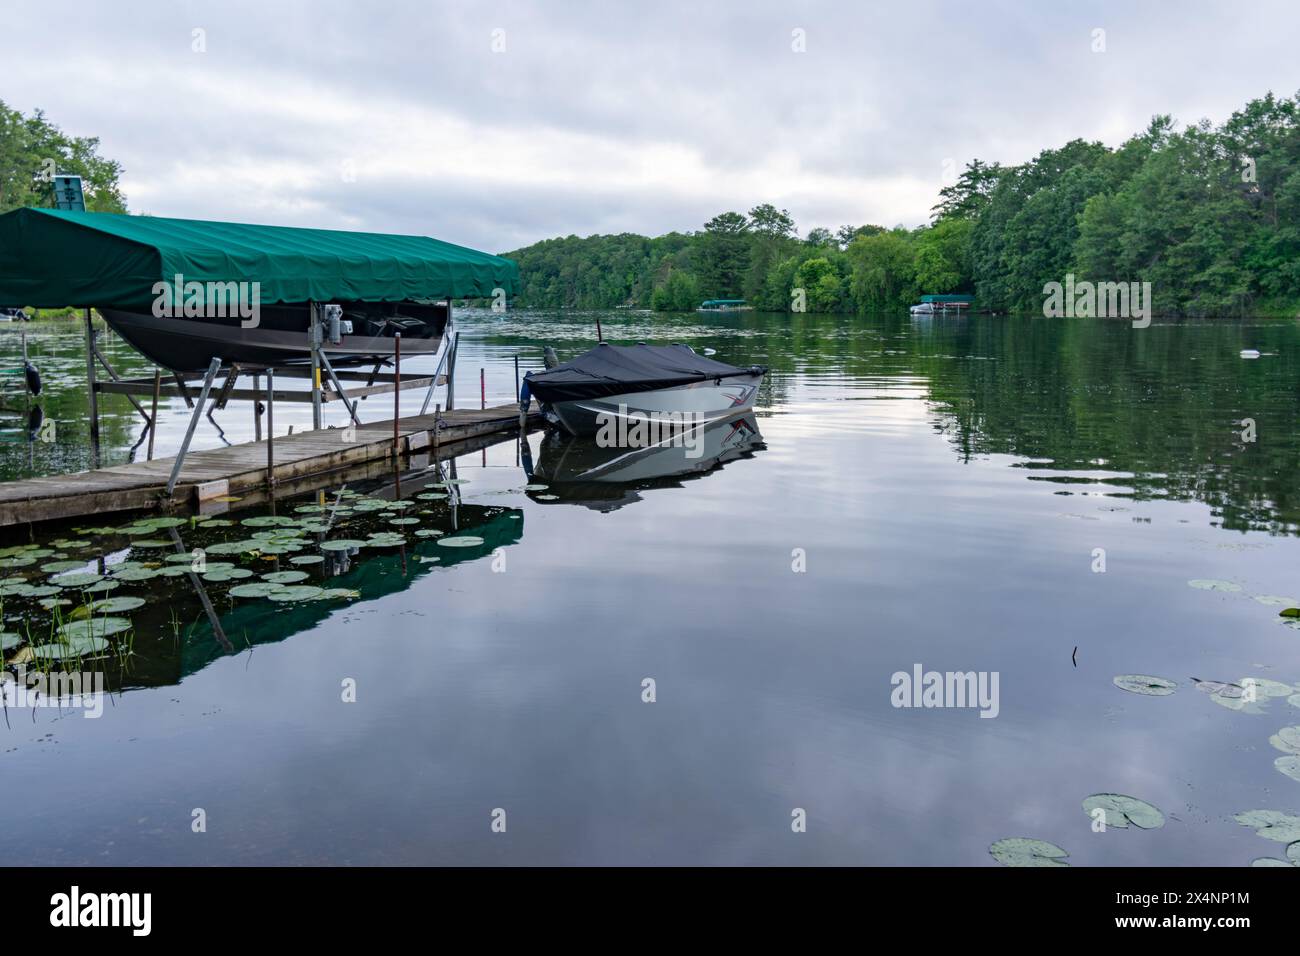 Looking out onto a northern Wisconsin lake in the evening with boats moored for the evening. Stock Photo